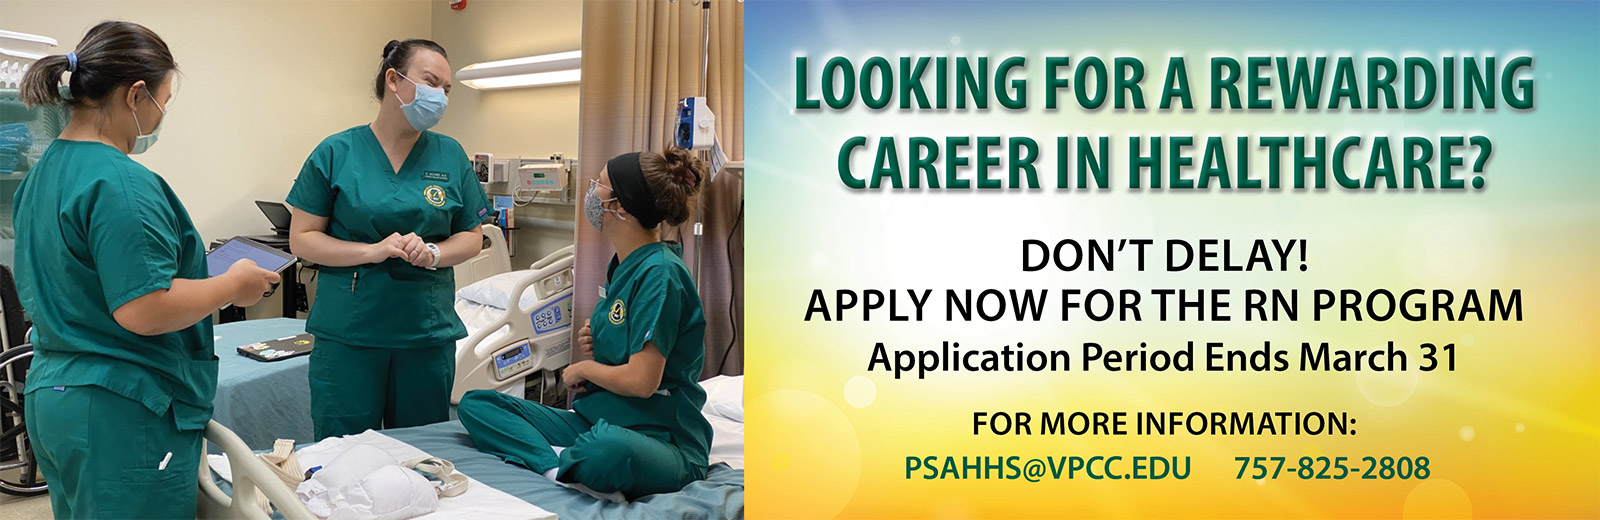 Looking for a Rewarding Career in Healthcare?